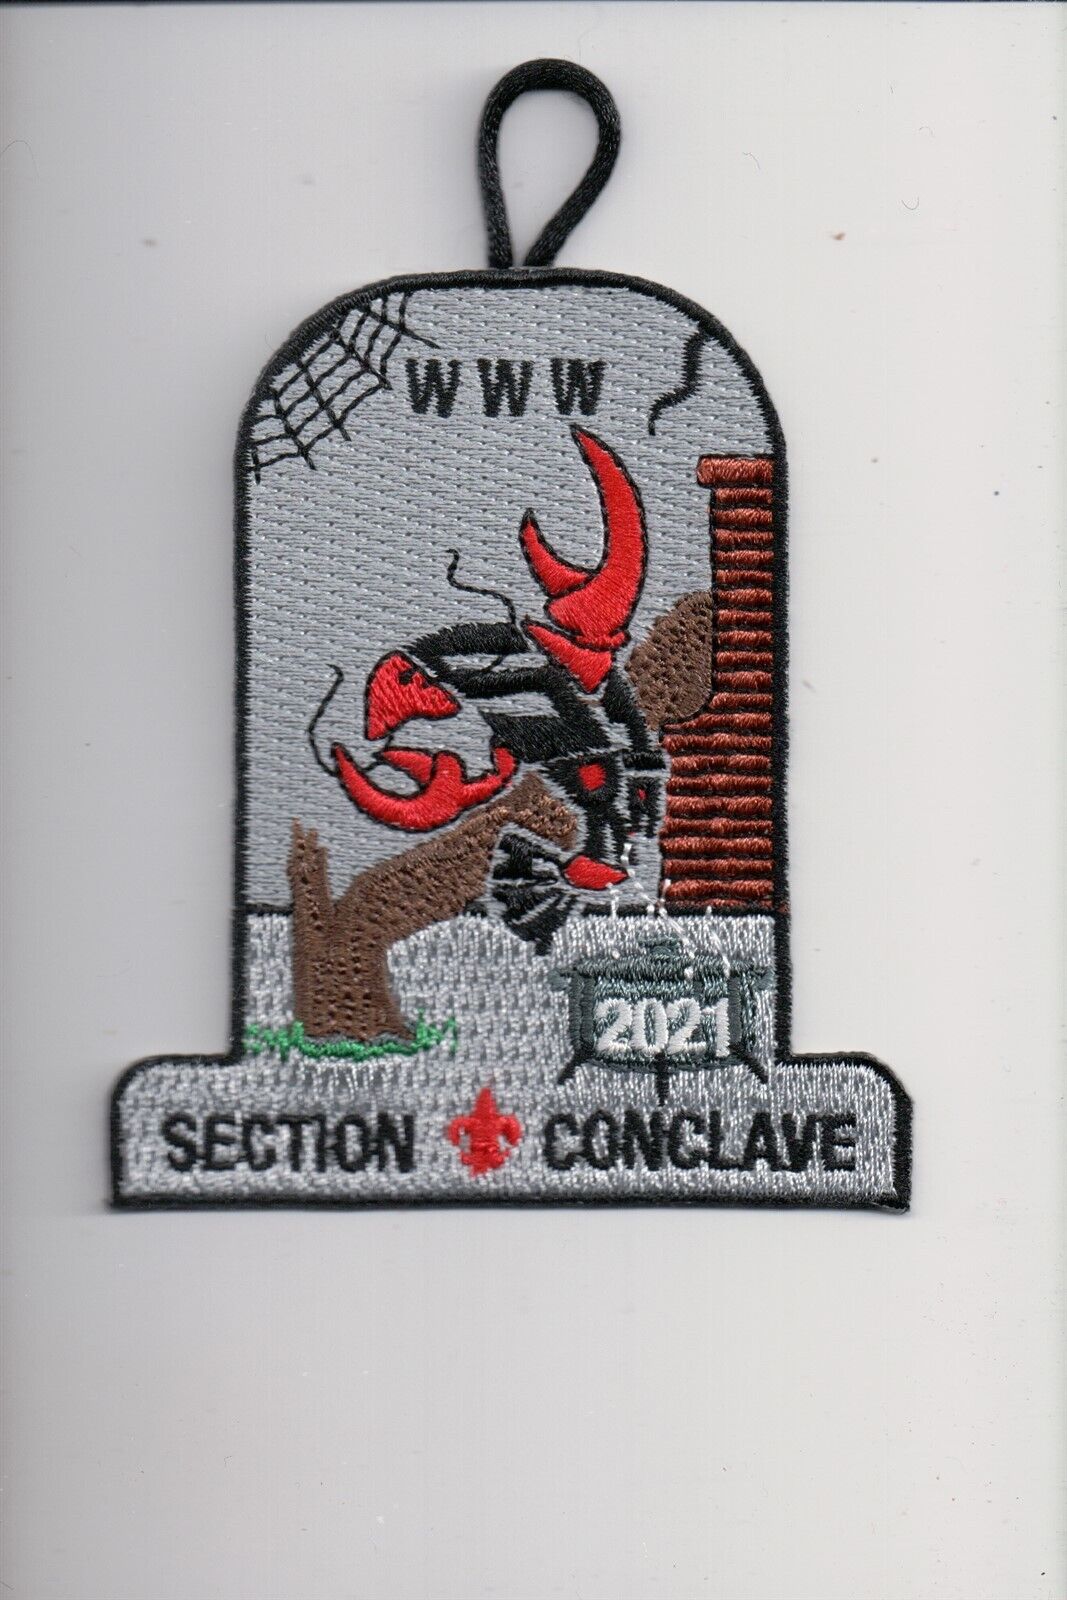 2021 Section Conclave OA patch